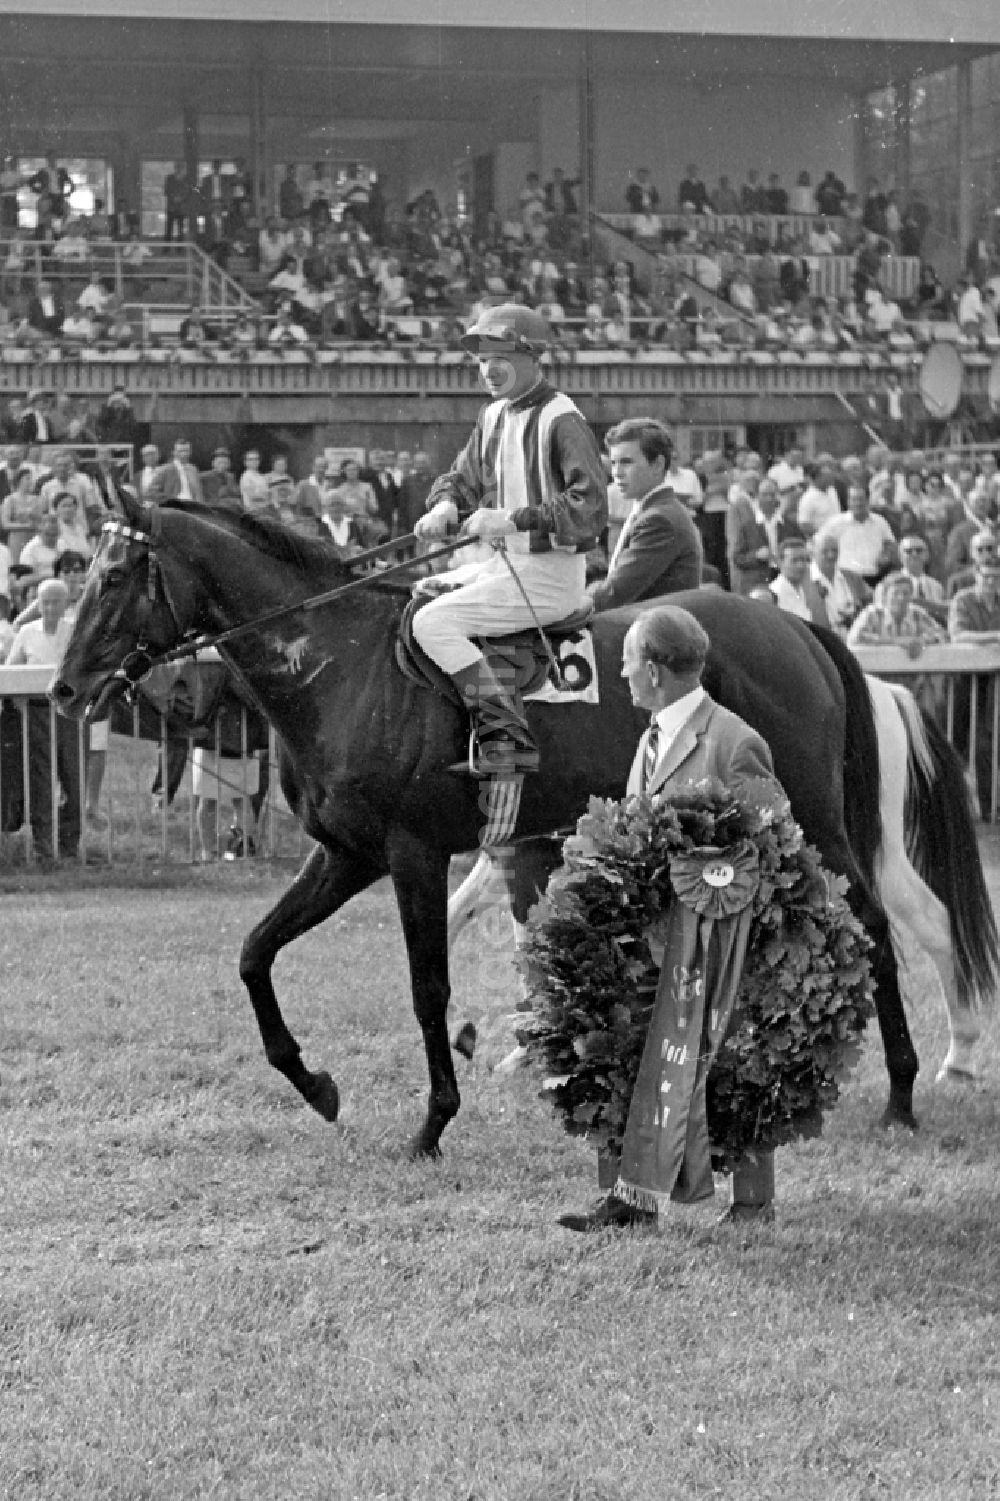 GDR image archive: Hoppegarten - Main with Alexander Mirus after the derby win in Hoppegarten in the state Brandenburg on the territory of the former GDR, German Democratic Republic